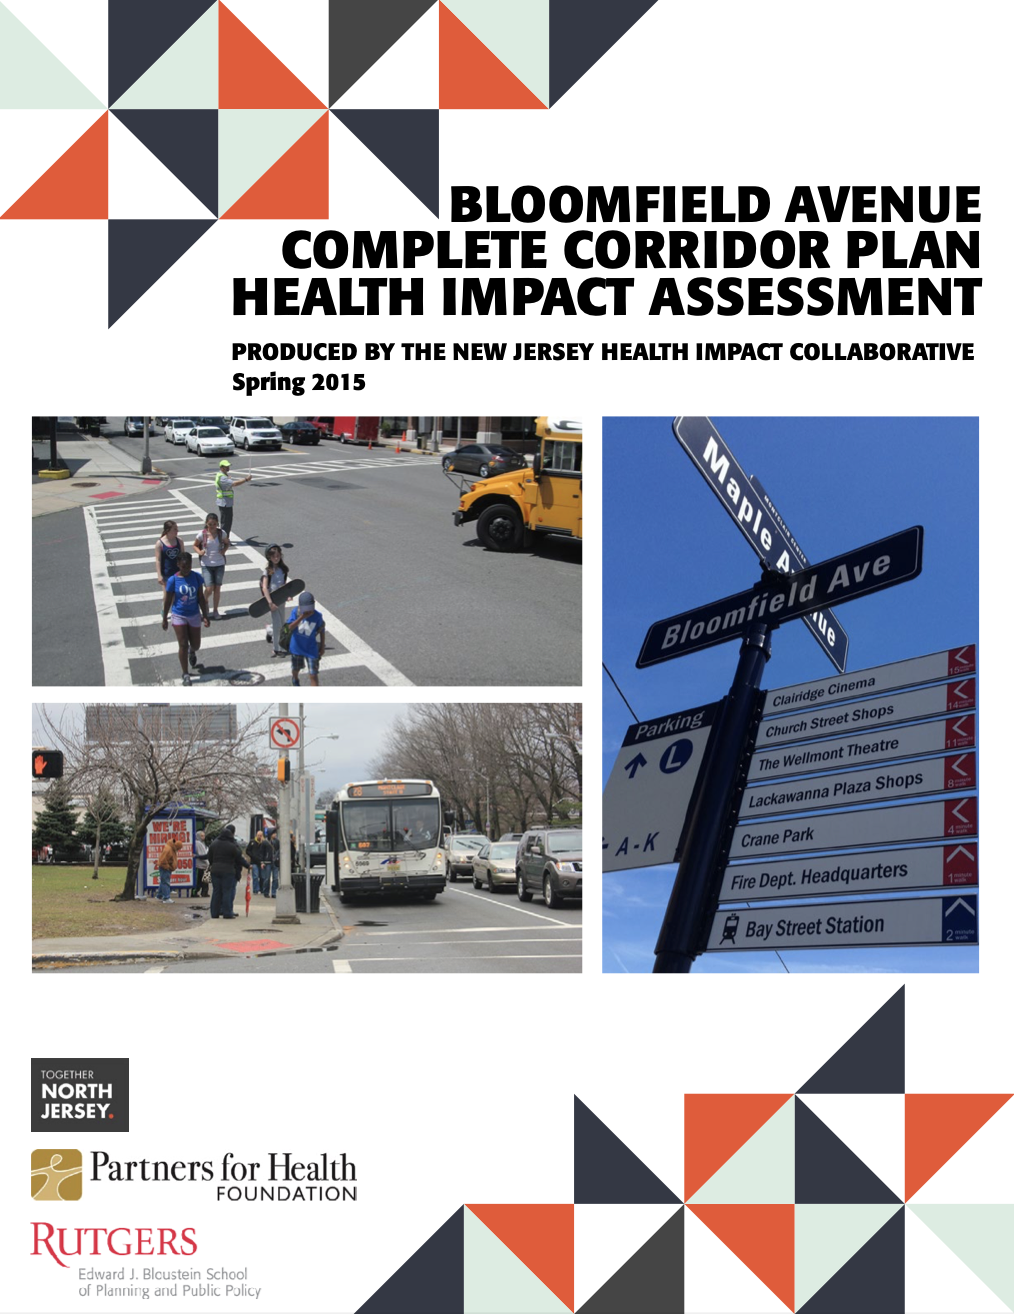 Bloomfield Ave. Complete Corridor Health Impact Assessment